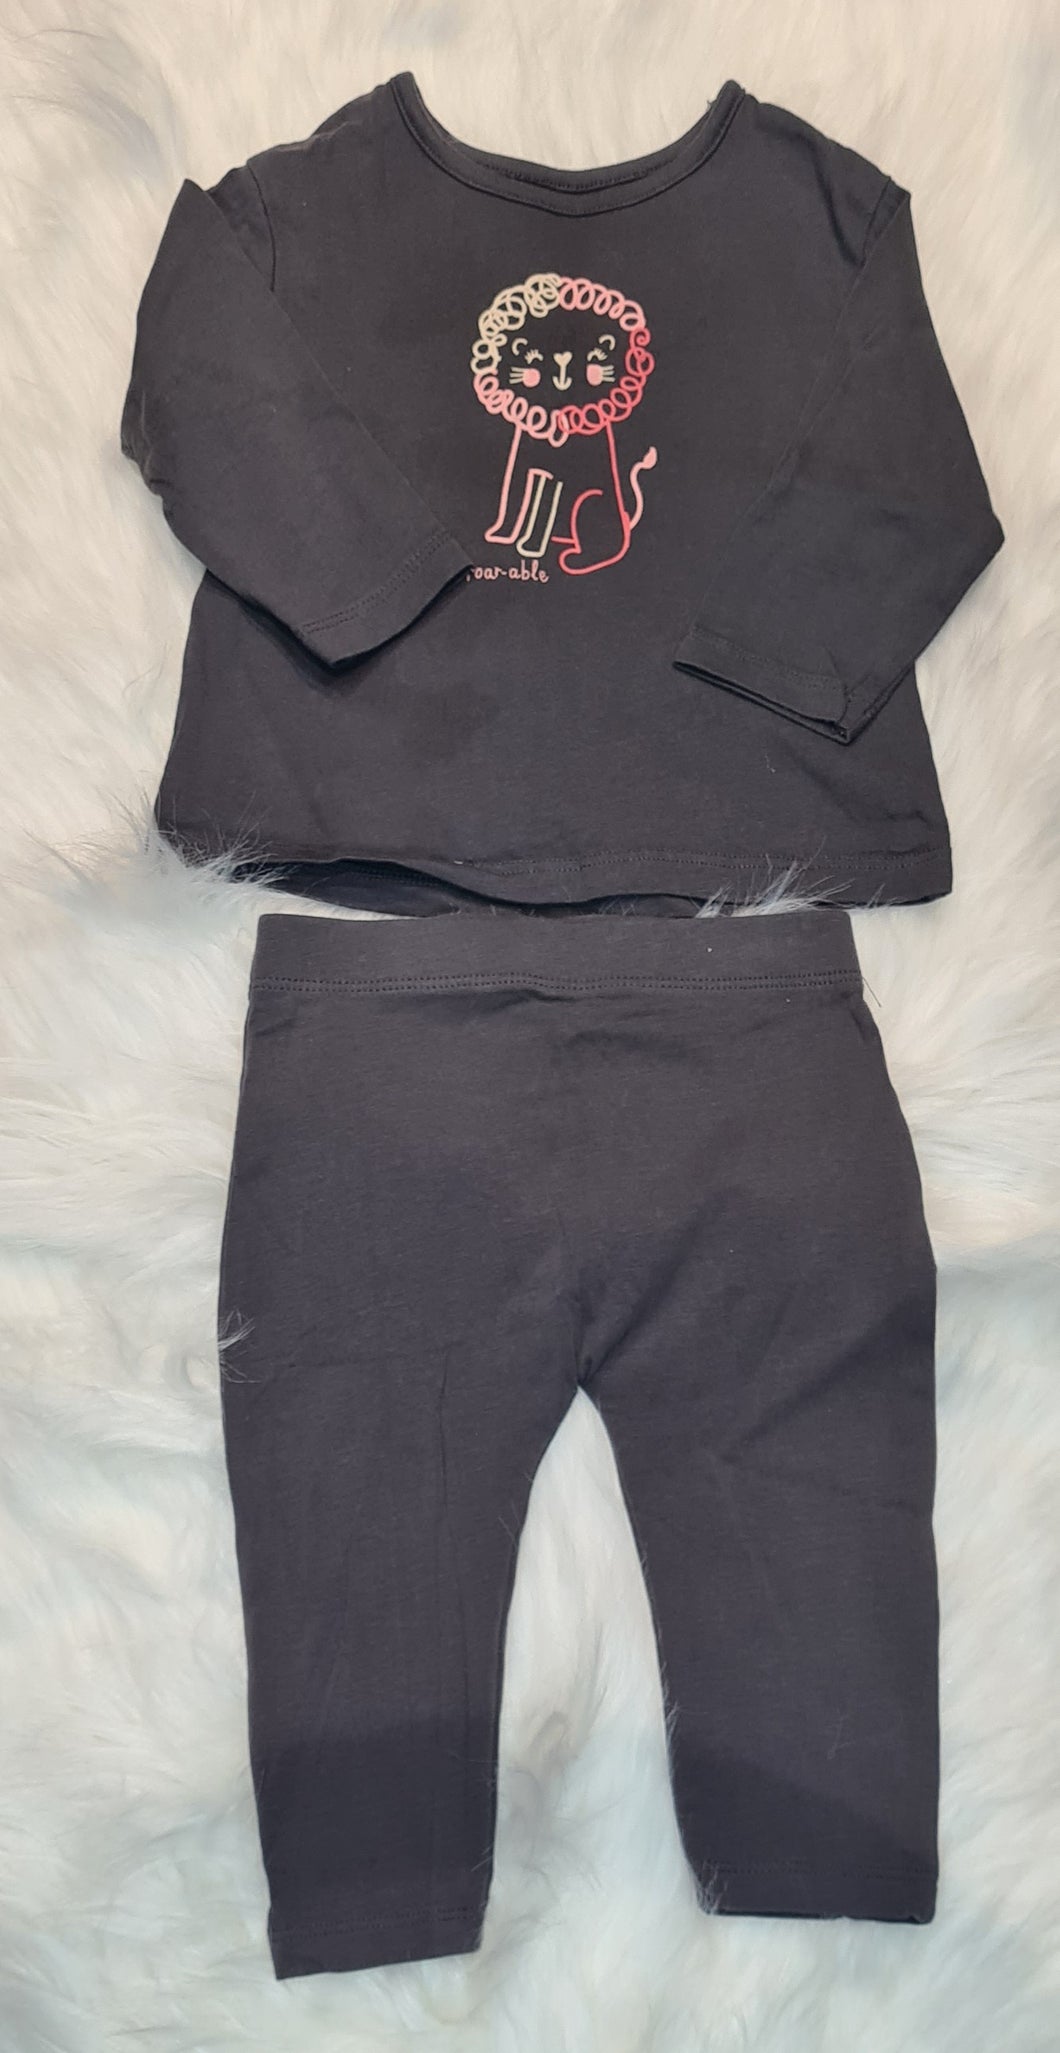 Girls 3-6 months - Lion Top and Leggings Set